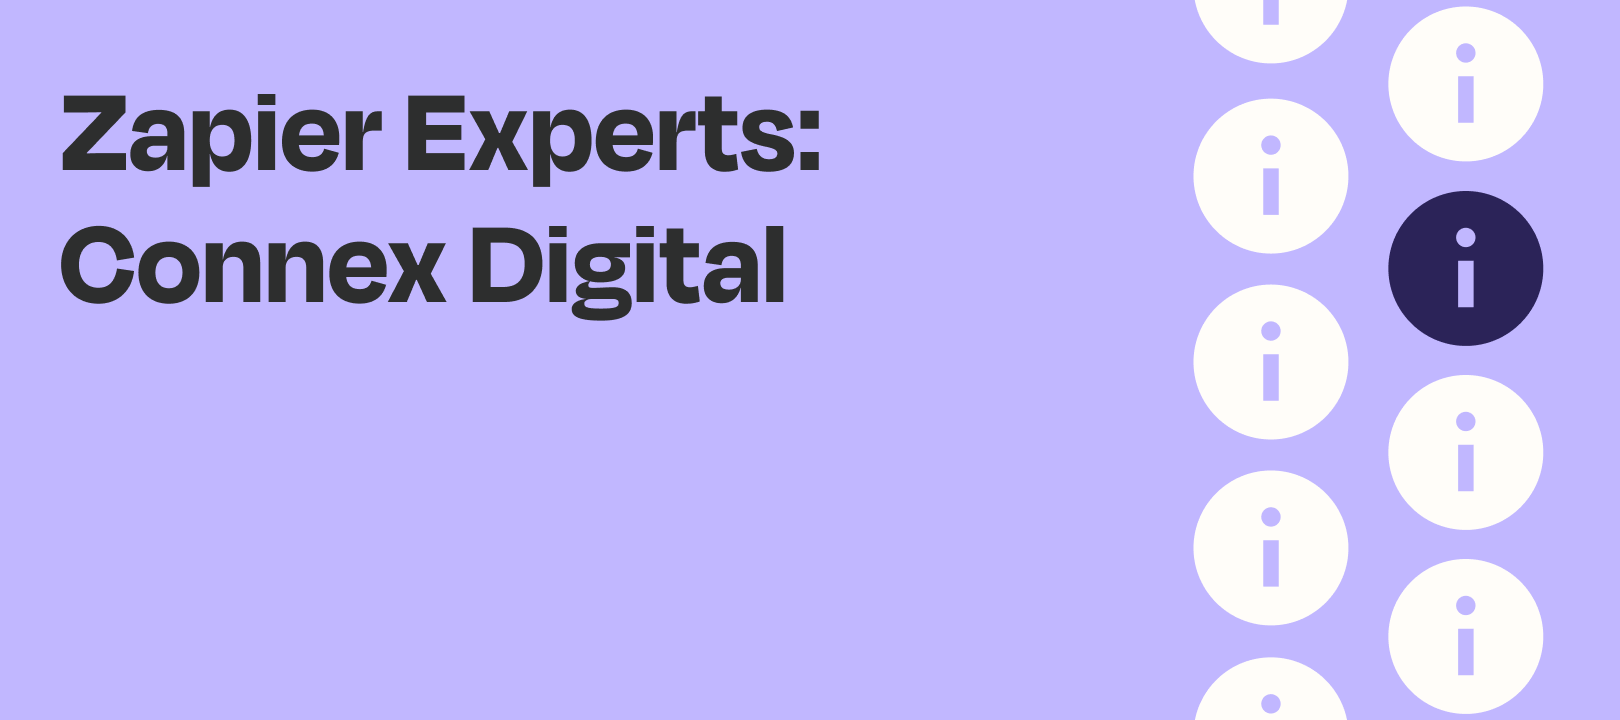 Our Premier Expert of the month: Connex Digital